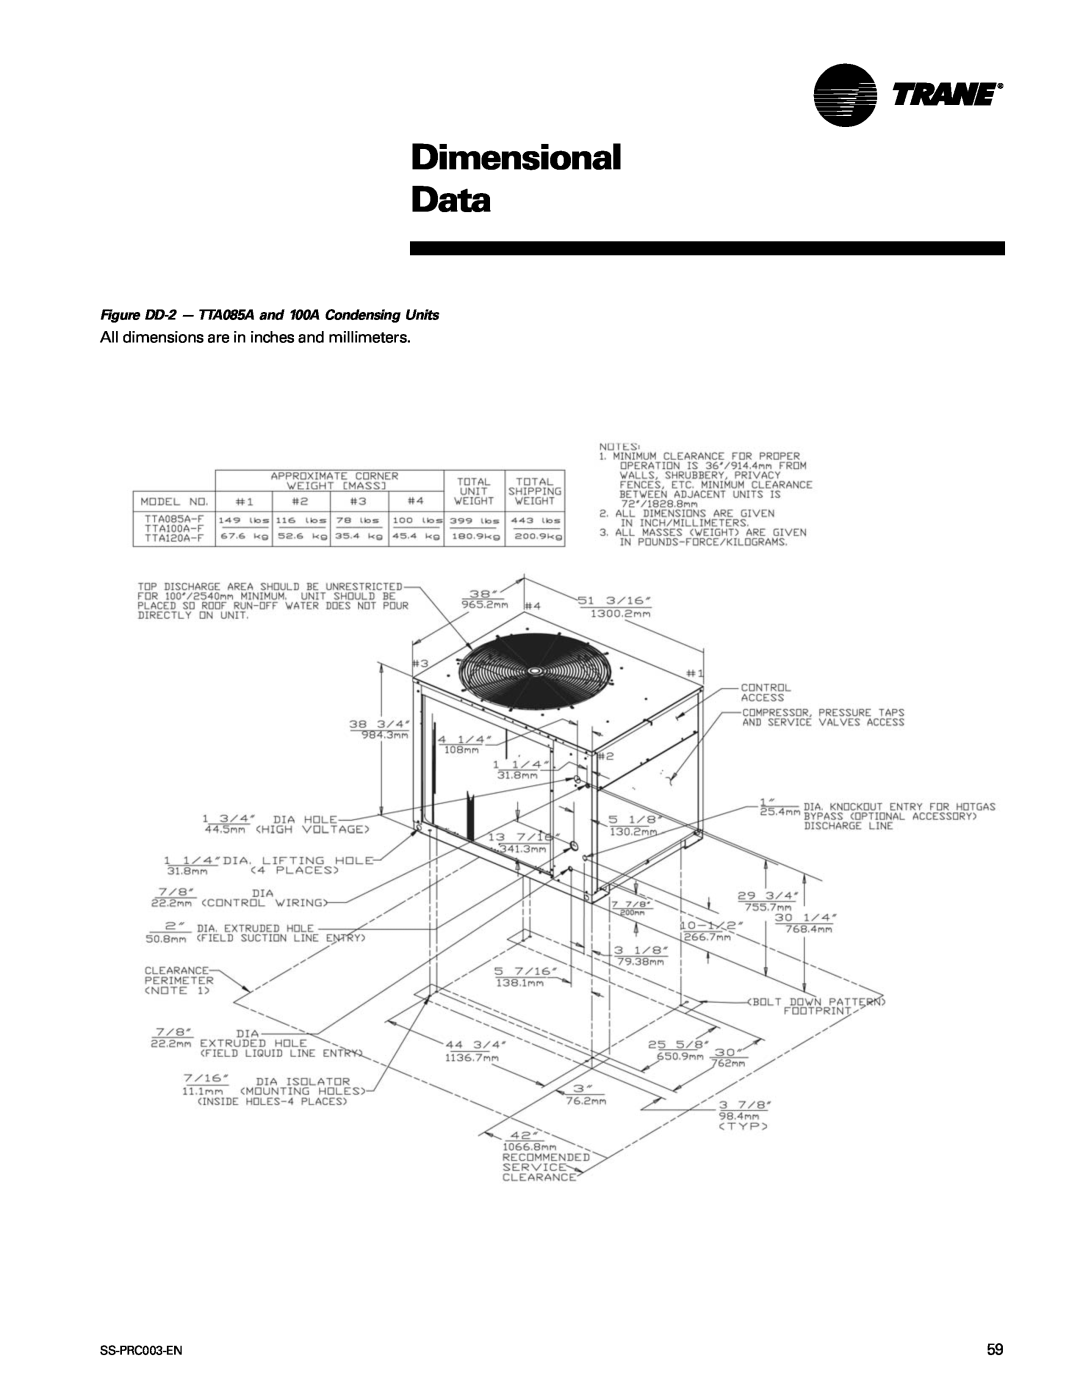 Trane SS-PRC003-EN manual Dimensional Data, All dimensions are in inches and millimeters 